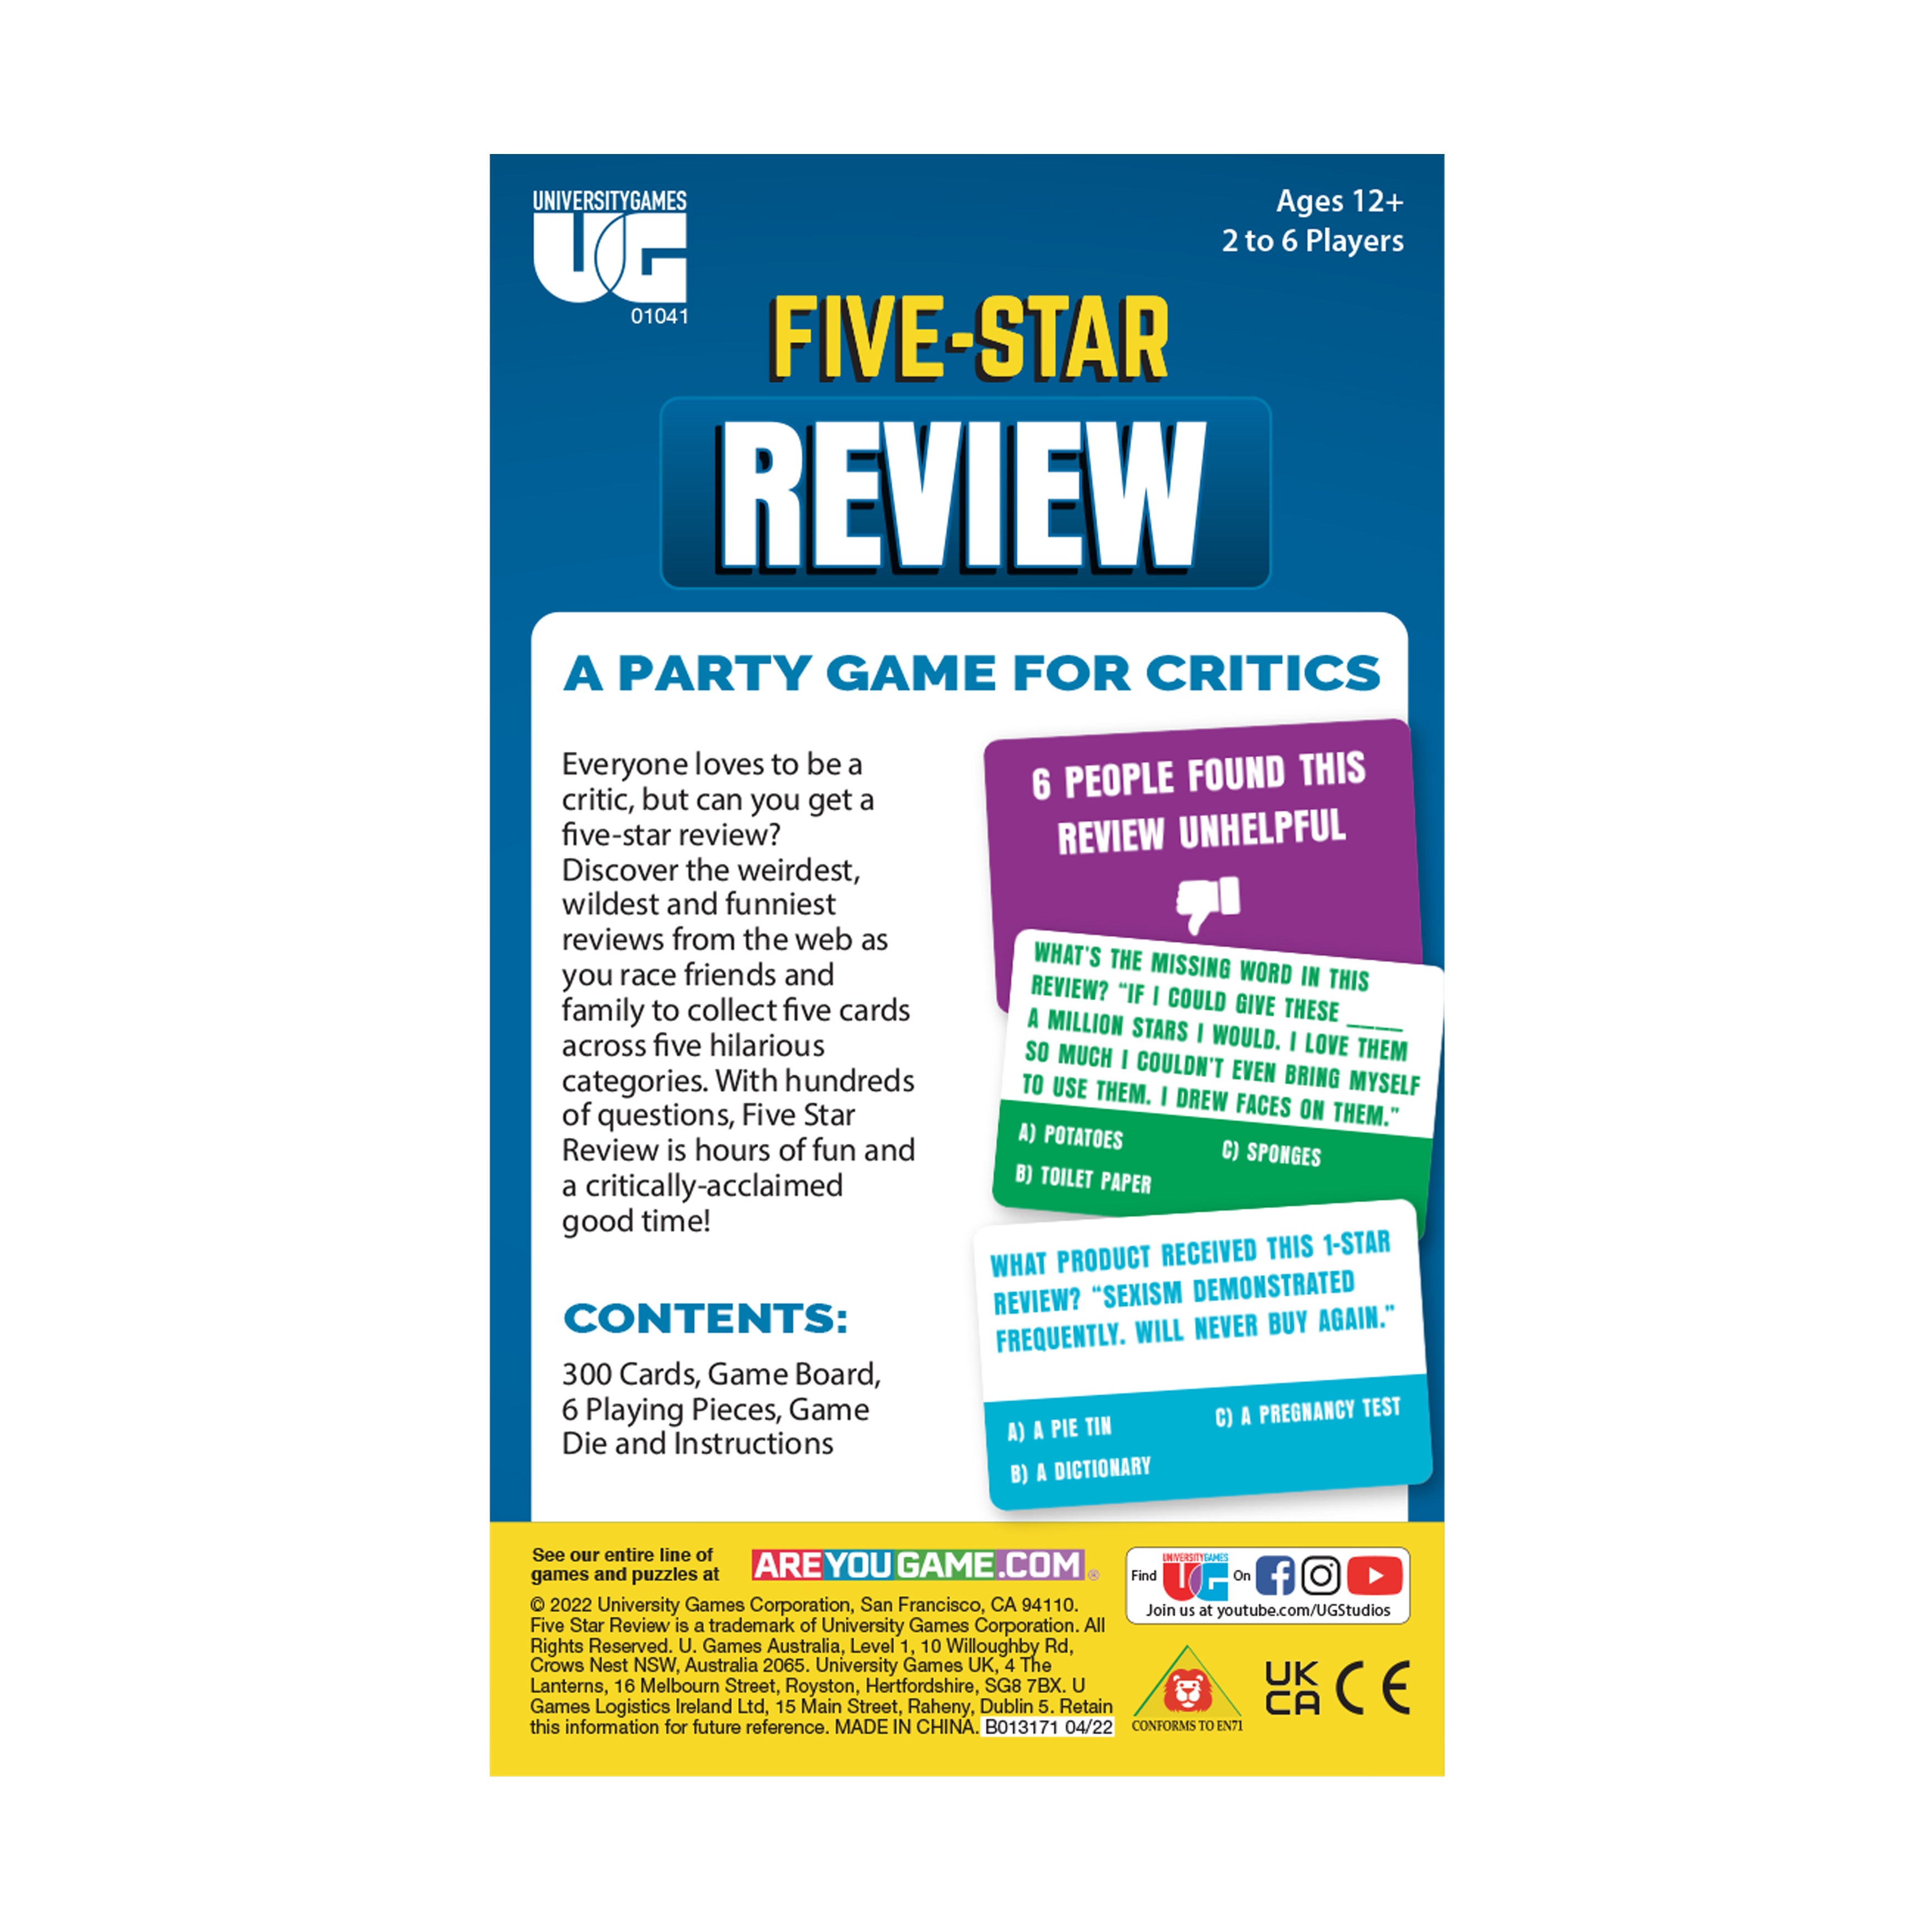 Just One party game review - The Board Game Family